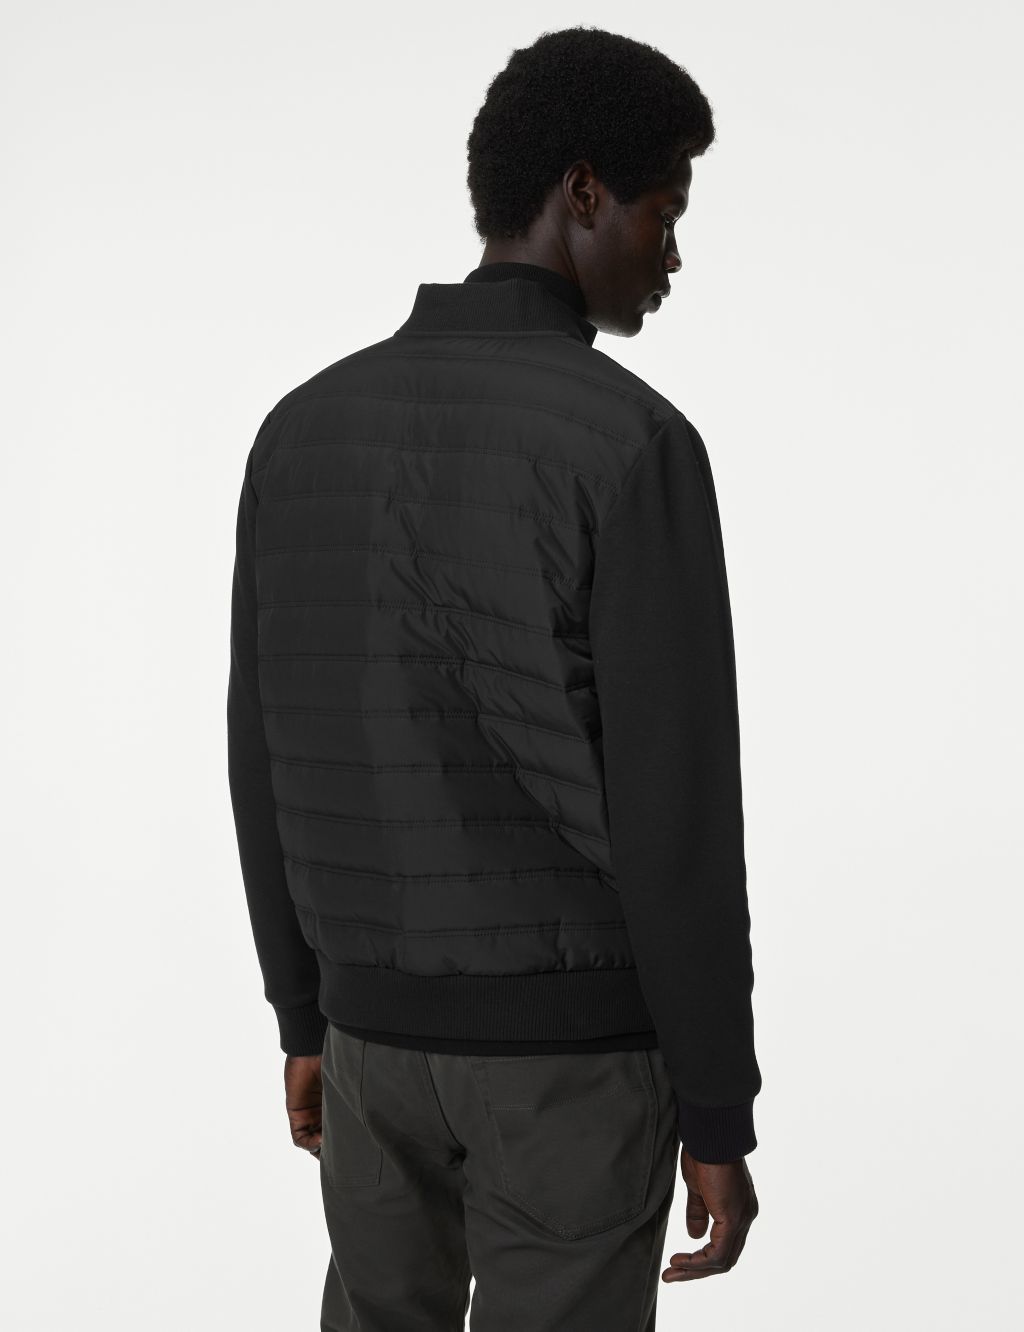 Quilted Bomber Jacket image 5